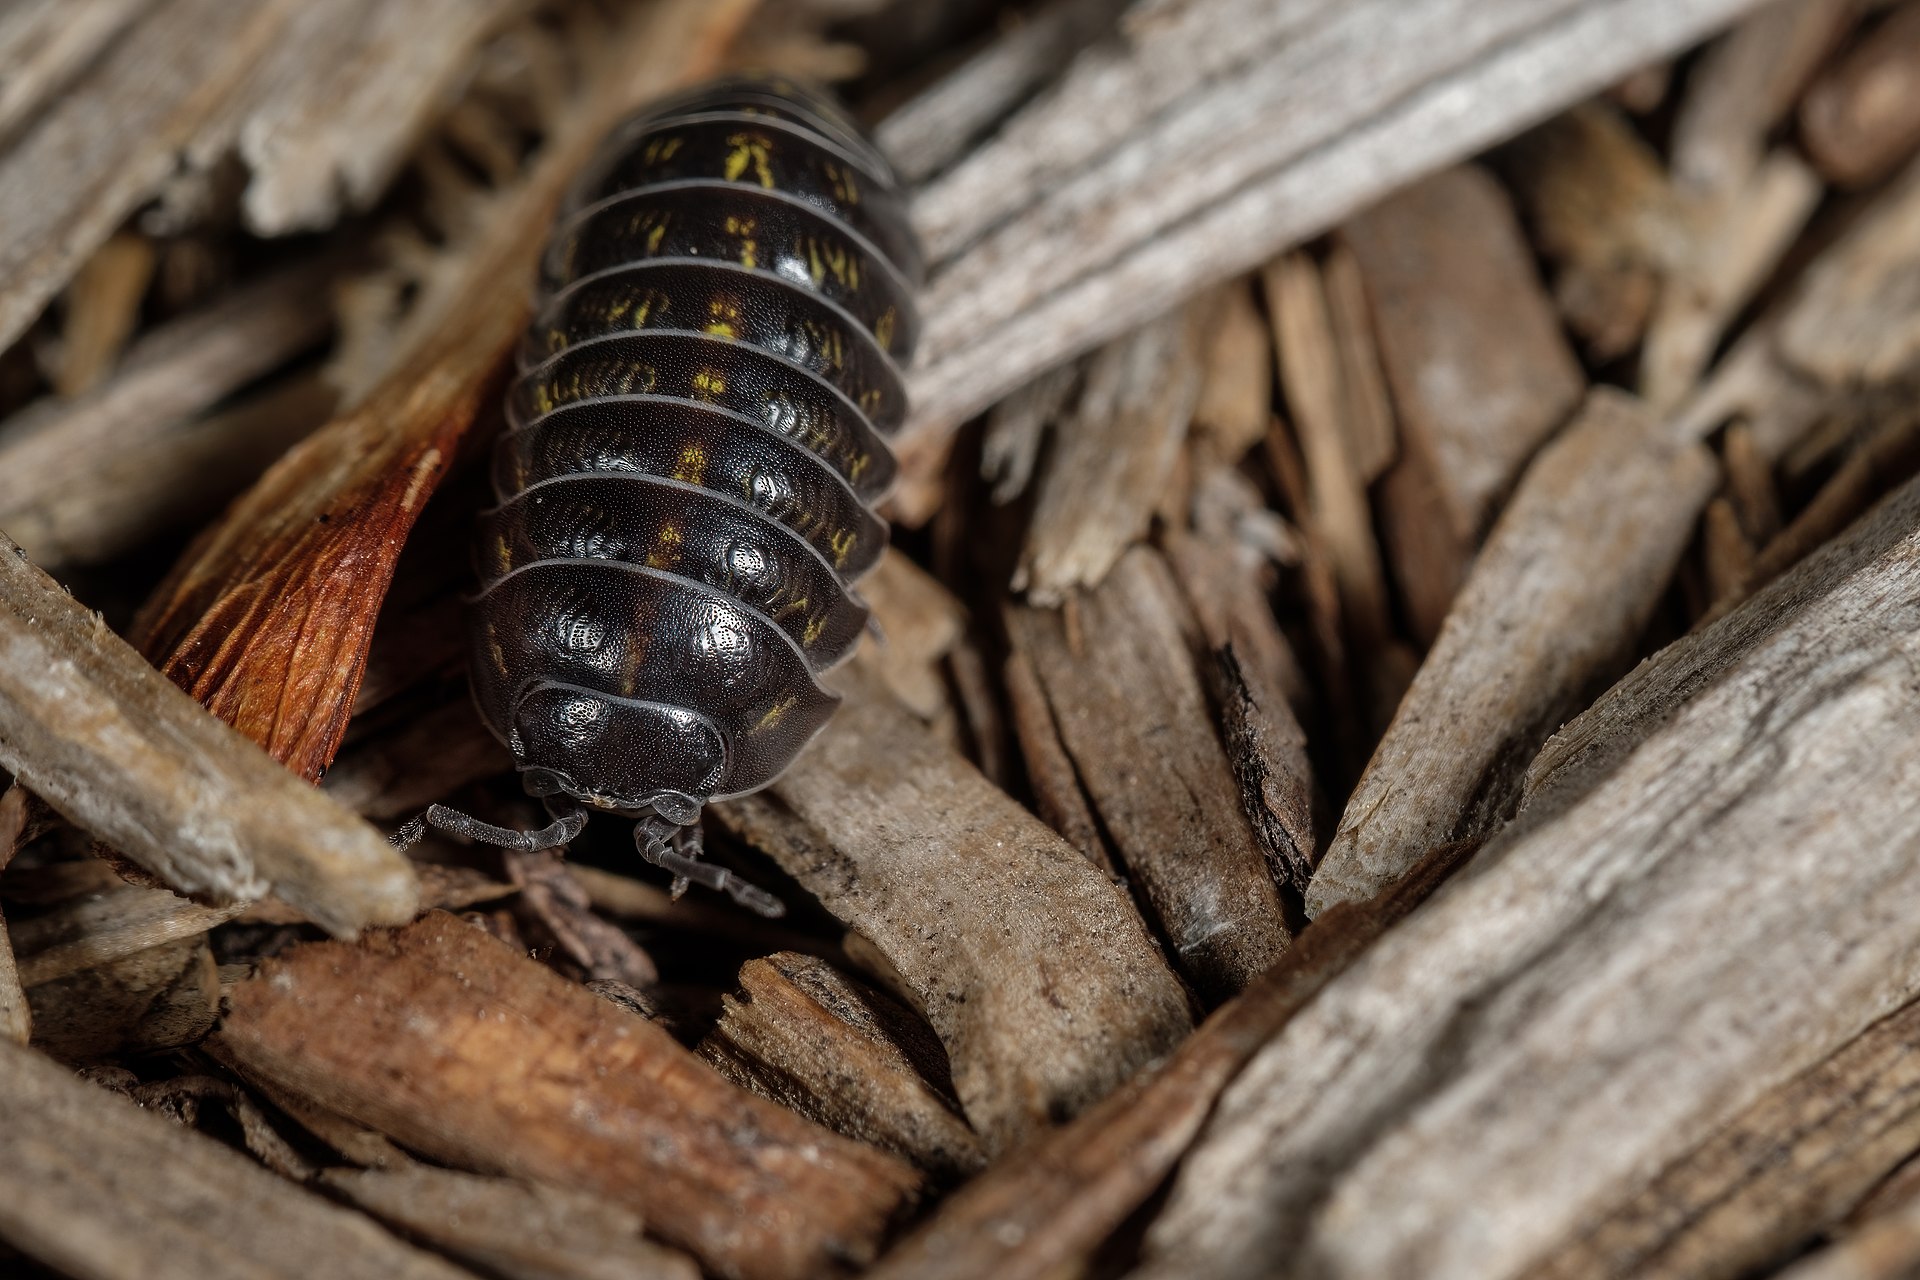 Roly Poly (isopod)